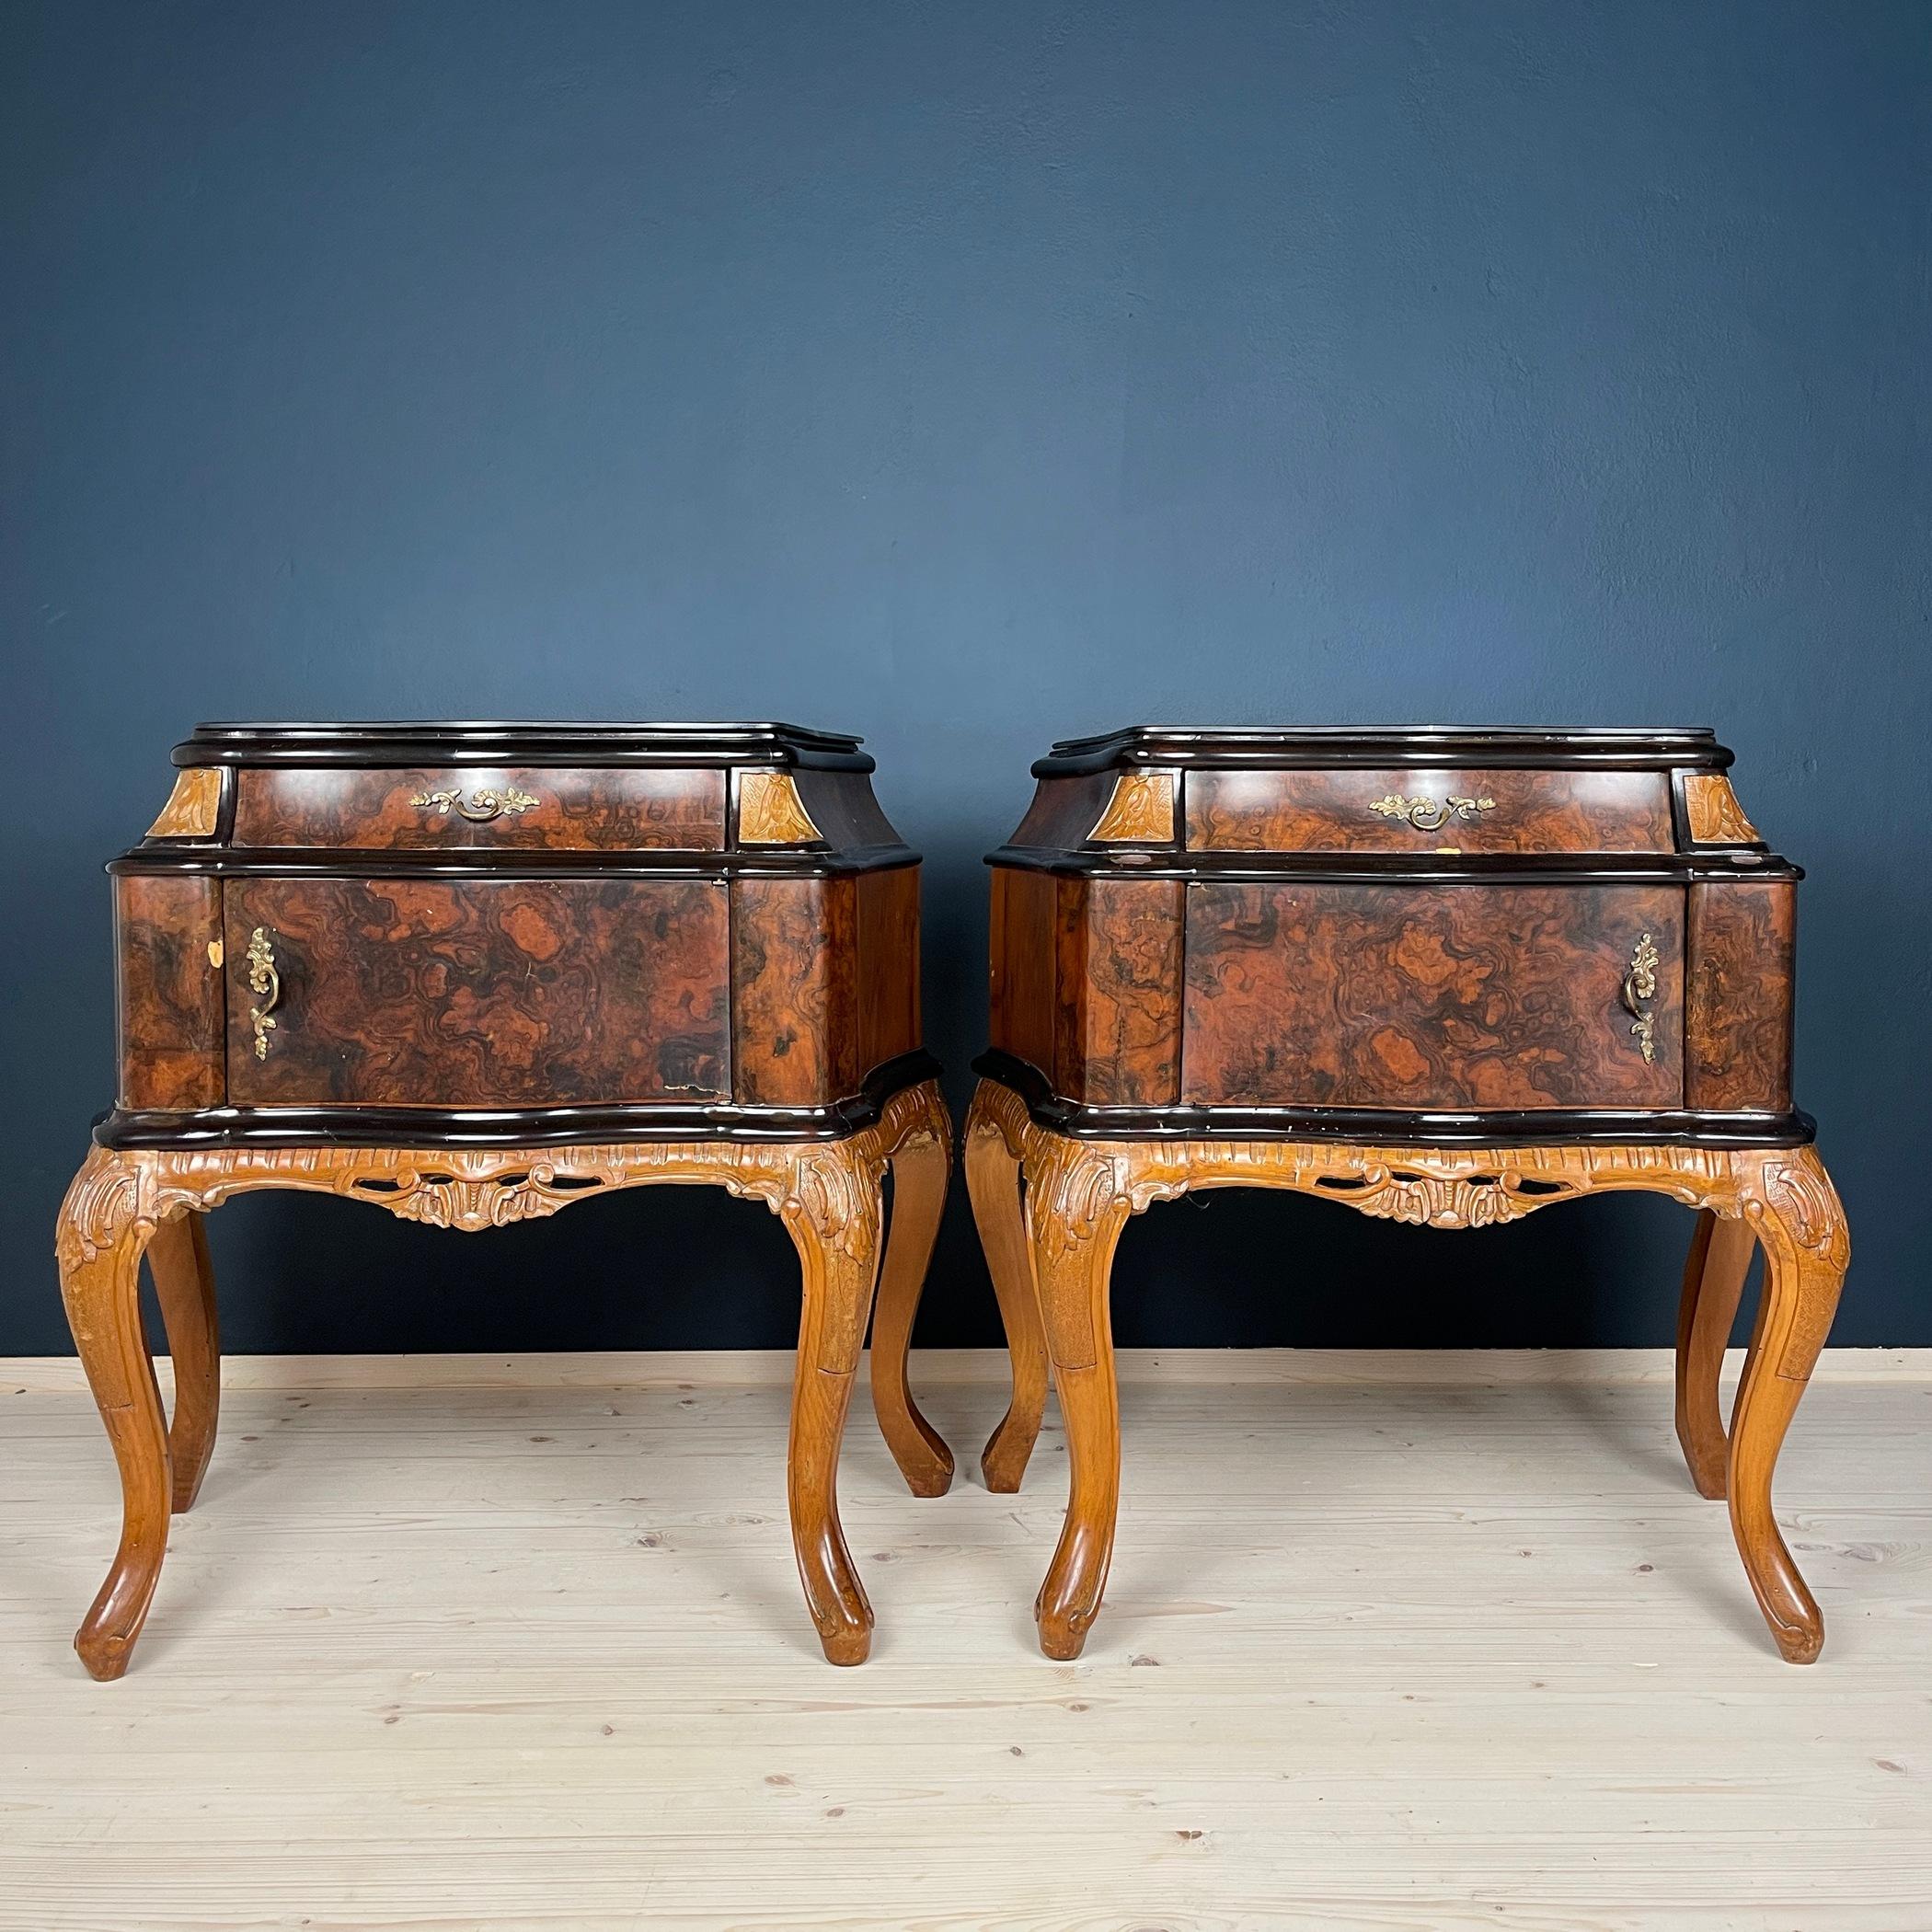 Elevate your bedroom decor with this exquisite pair of Italian bedside tables, crafted with precision and elegance in the 1950s. These bedside tables embody the timeless design sensibilities of mid-century Italian furniture. The use of solid wood,